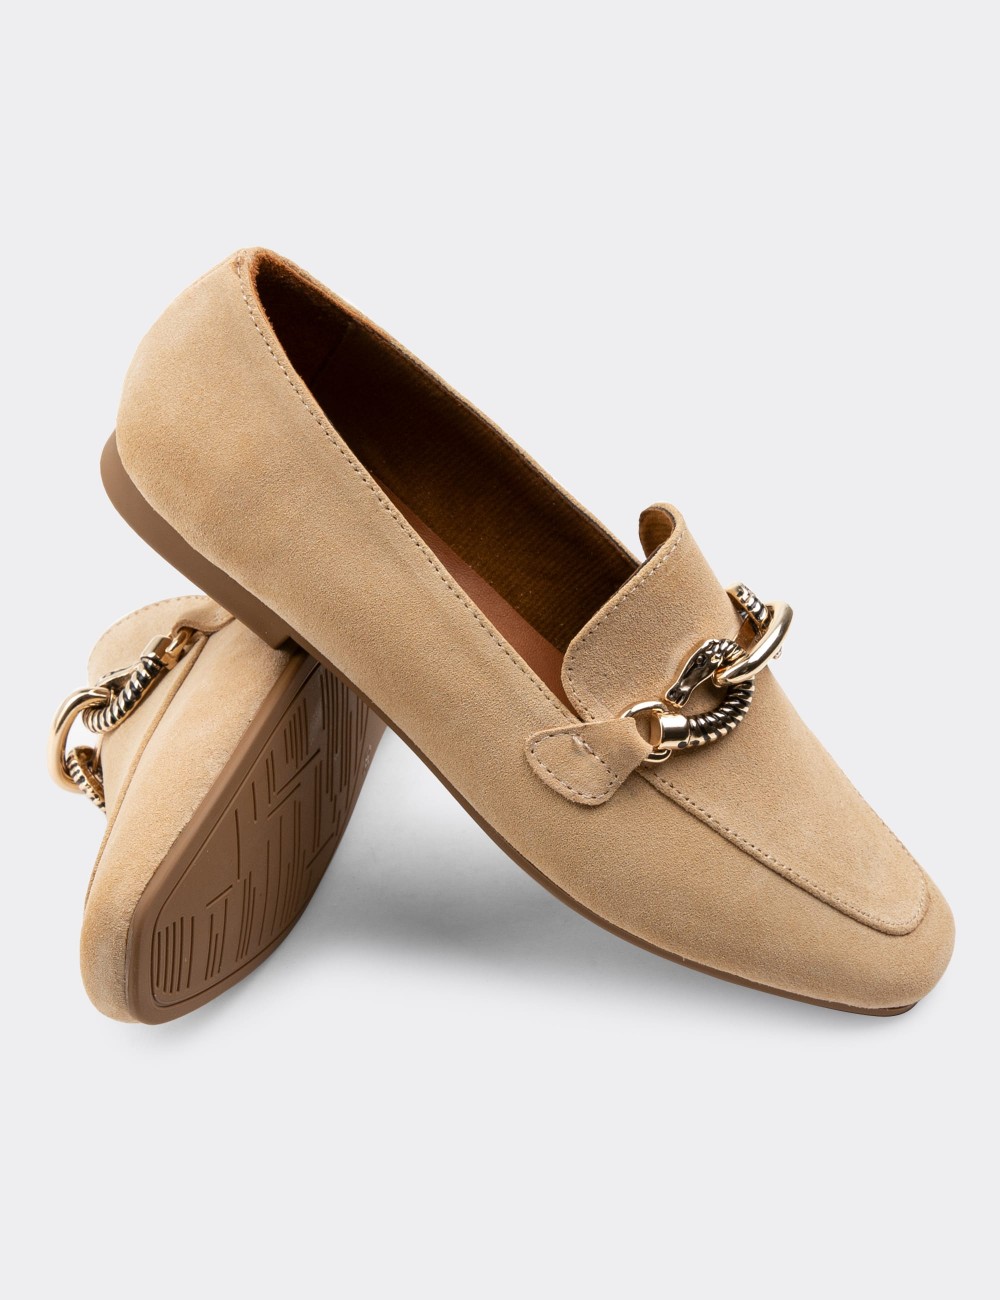 Beige Suede Leather Loafers - 01912ZBEJC01